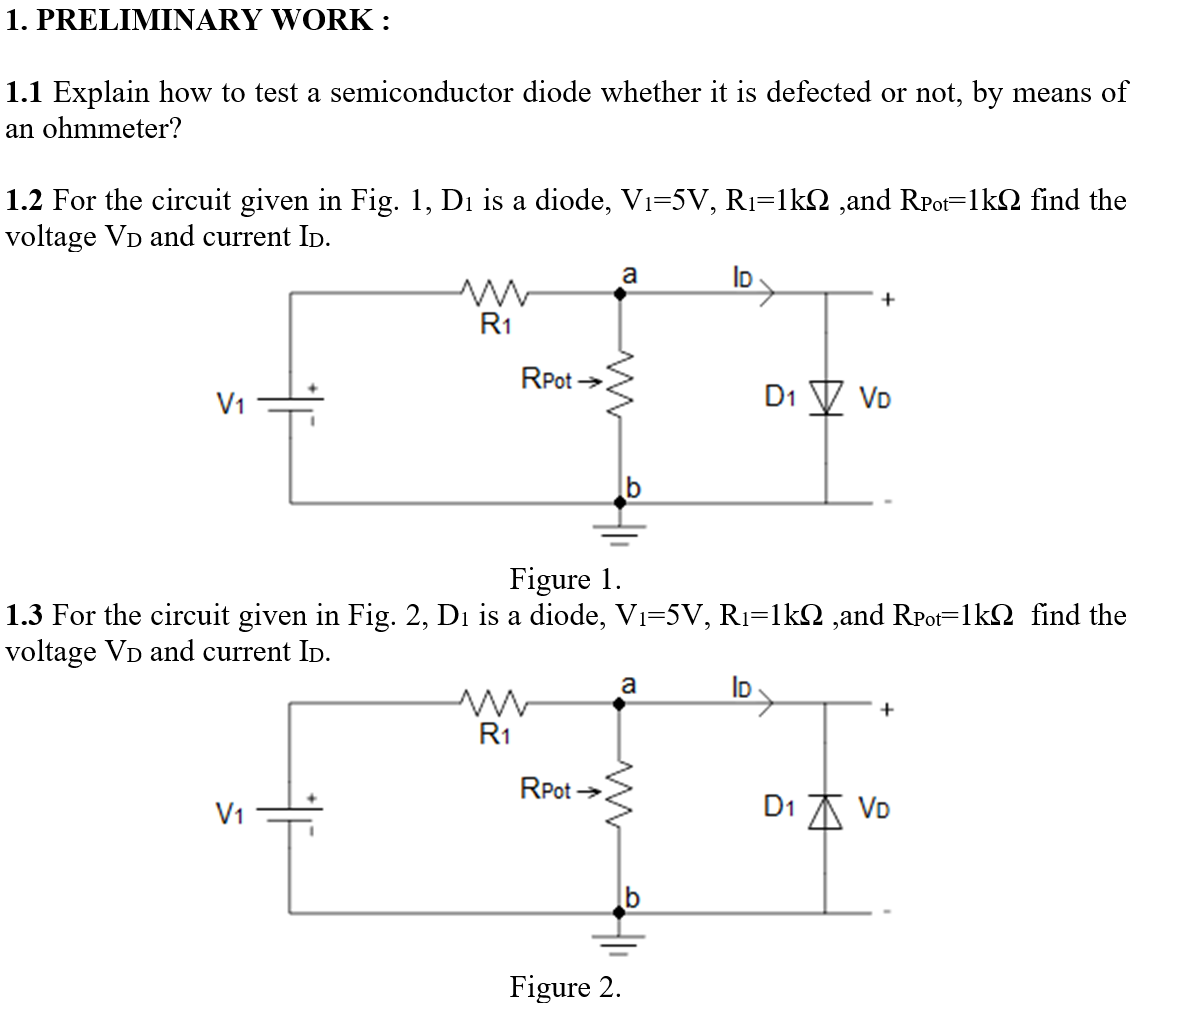 1. PRELIMINARY WORK:
1.1 Explain how to test a semiconductor diode whether it is defected or not, by means of
an ohmmeter?
1.2 For the circuit given in Fig. 1, Di is a diode, Vi=5V, Rı=1k2 ,and RPot=1kN find the
voltage VD and current ID.
a
ID
+
R1
RPot →
V1
D1 V Vo
Figure 1.
1.3 For the circuit given in Fig. 2, Di is a diode, Vi=5V, R1=1kN ,and RPot=1k2 find the
voltage VD and current ID.
a
ID
R1
RPot >
V1
D1 A VD
Figure 2.
